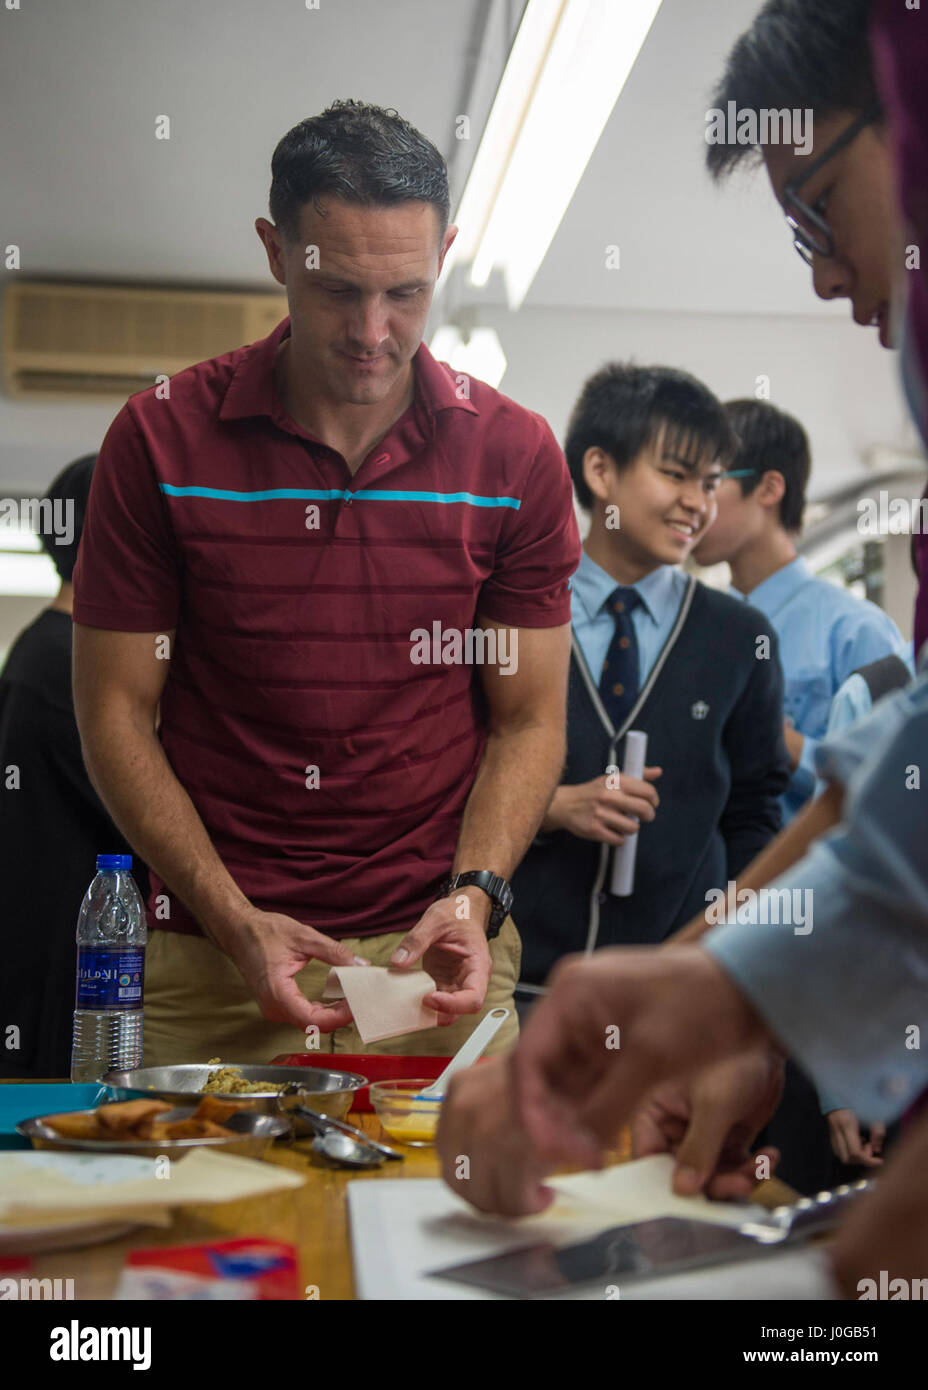 170410-N-LI768-366  HONG KONG (April 10, 2017) Staff Sgt. Carson Clover, assigned to Marine Medium Tiltrotor Squadron (VMM) 163, embarked aboard the amphibious assault ship USS Makin Island (LHD 8), makes spring rolls as part of a cultural exchange between Makin Island Sailors and Marines and students at SHK Tsoi Kung Po secondary school in Hong Kong. Makin Island, with the embarked 11th Marine Expeditionary Unit, visited Hong Kong to experience the city's rich culture and history as part of ongoing operations in the Indo-Asia-Pacific region. (U.S. Navy photo by Mass Communication Specialist 3 Stock Photo